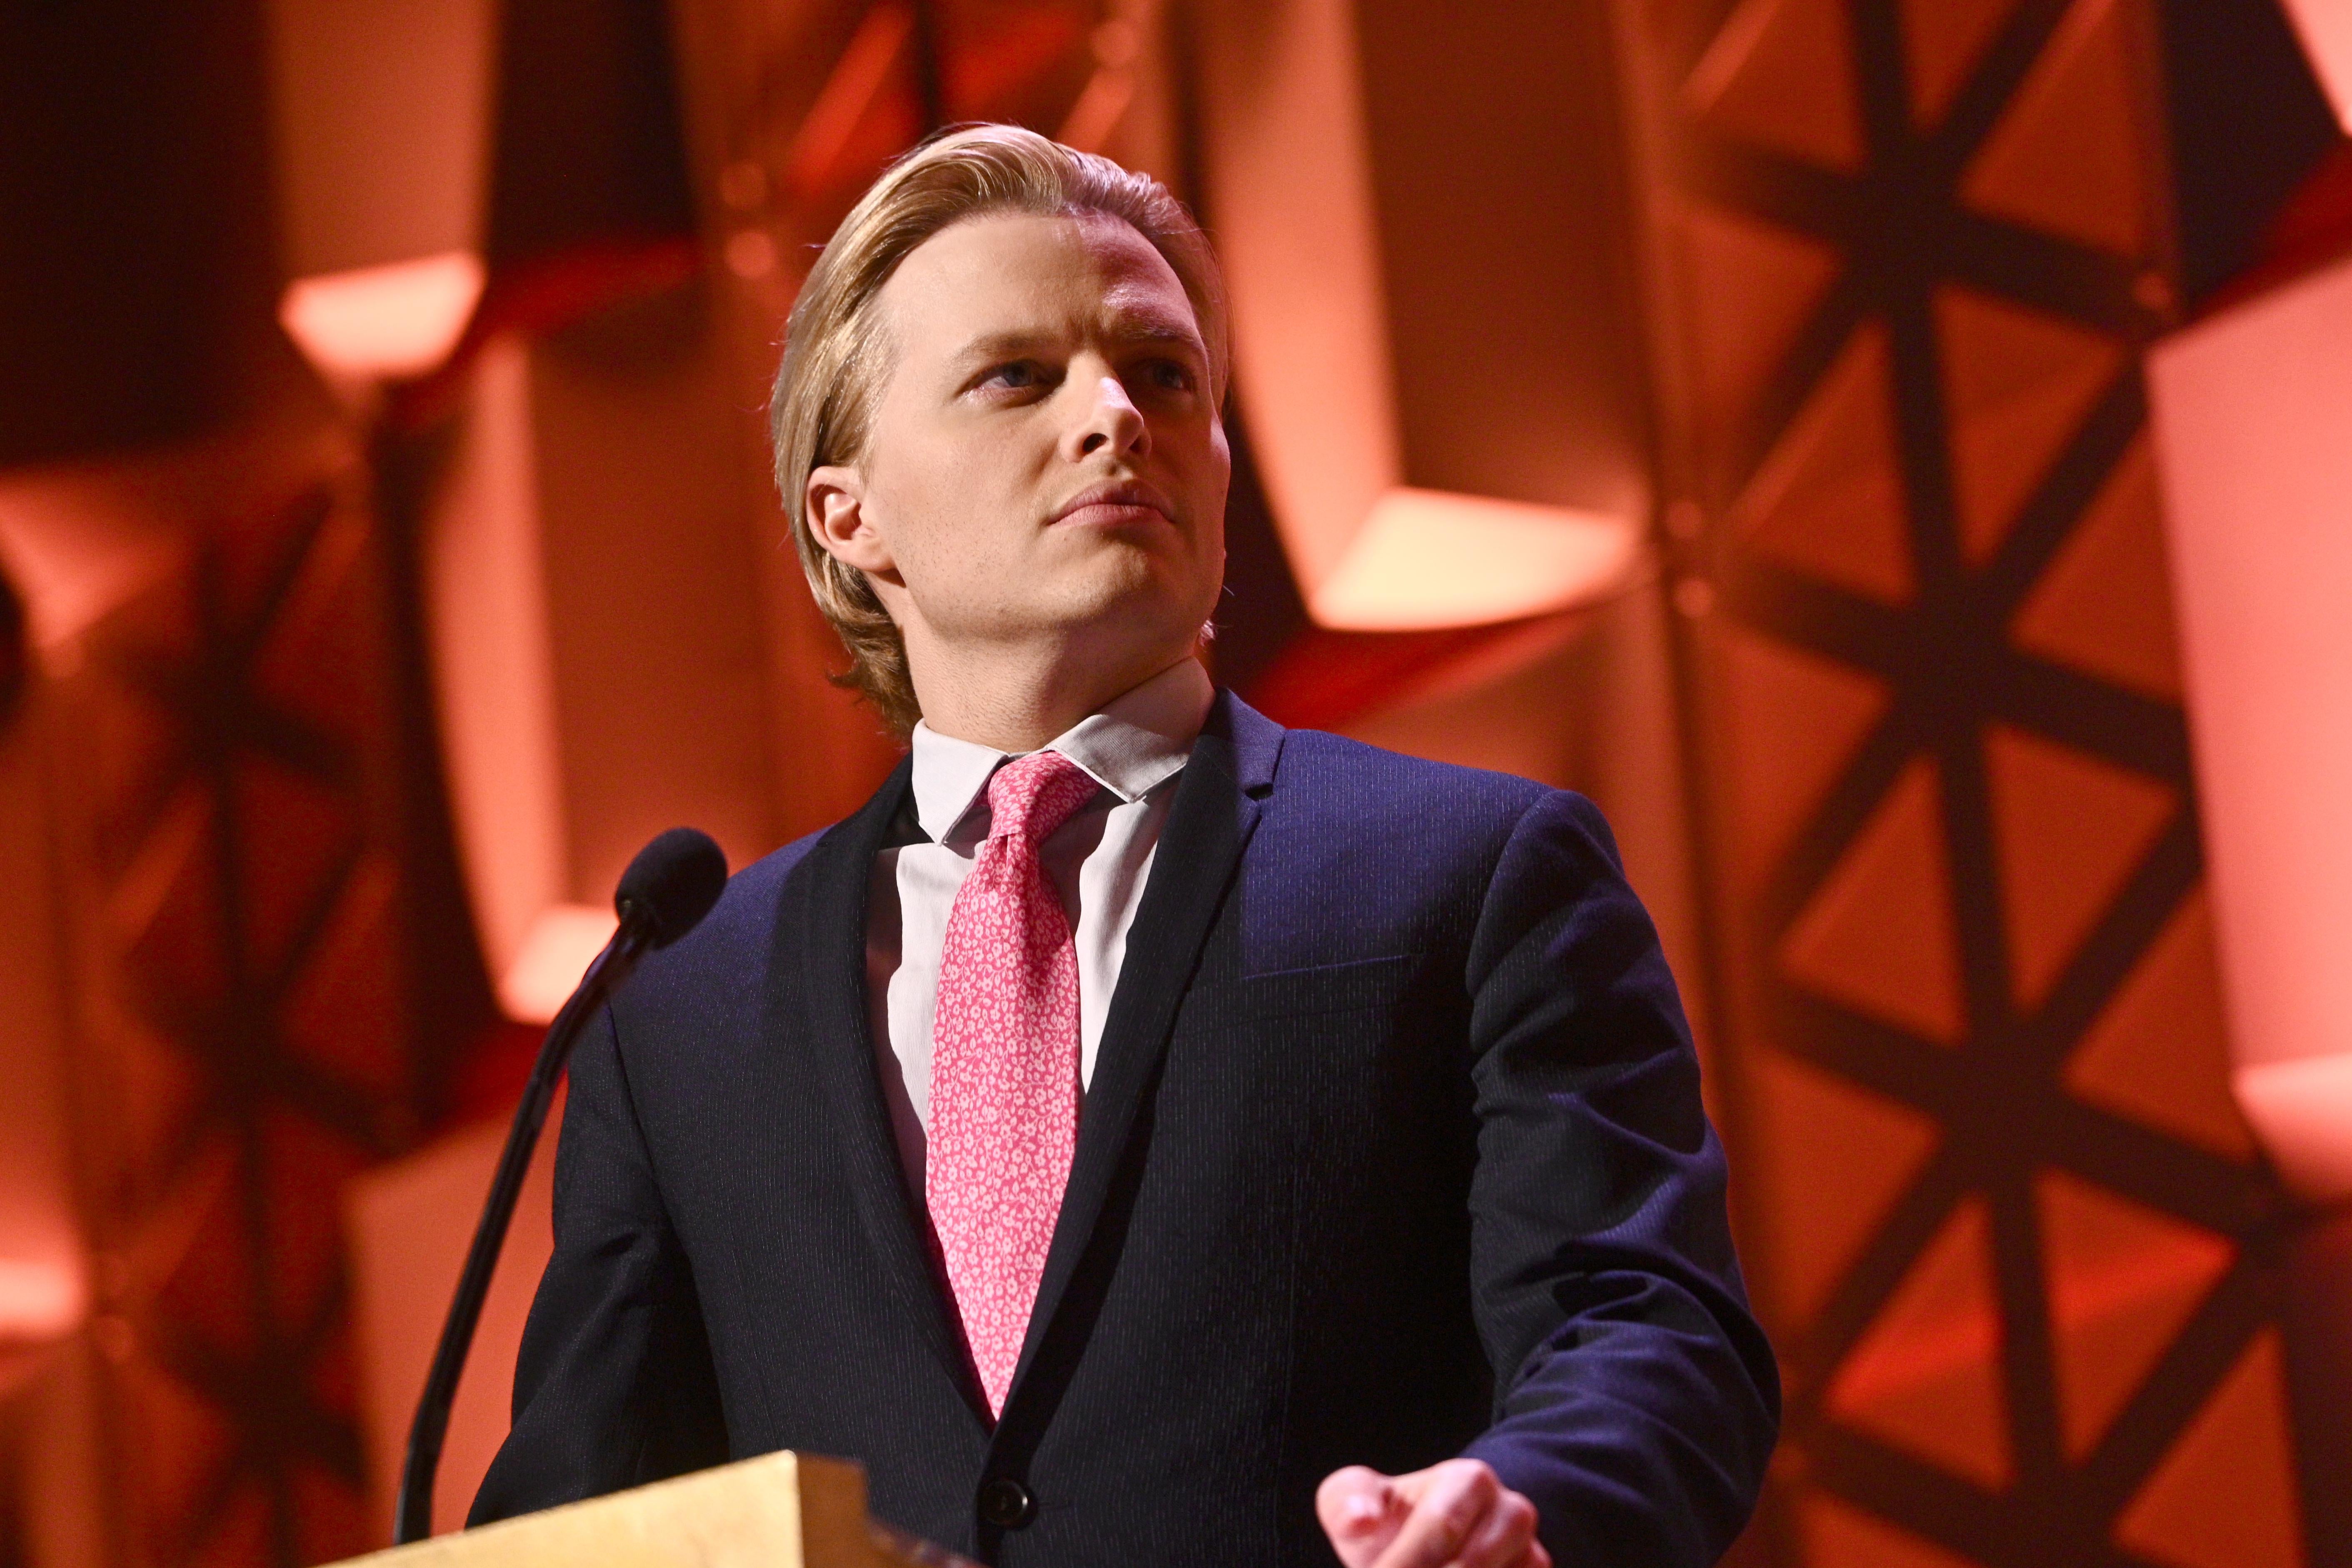 Ronan Farrow, in front of a podium from the torso up, speaks onstage at the Peabody Awards Ceremony Sponsored By Mercedes-Benz at Cipriani Wall Street on May 18 in New York.